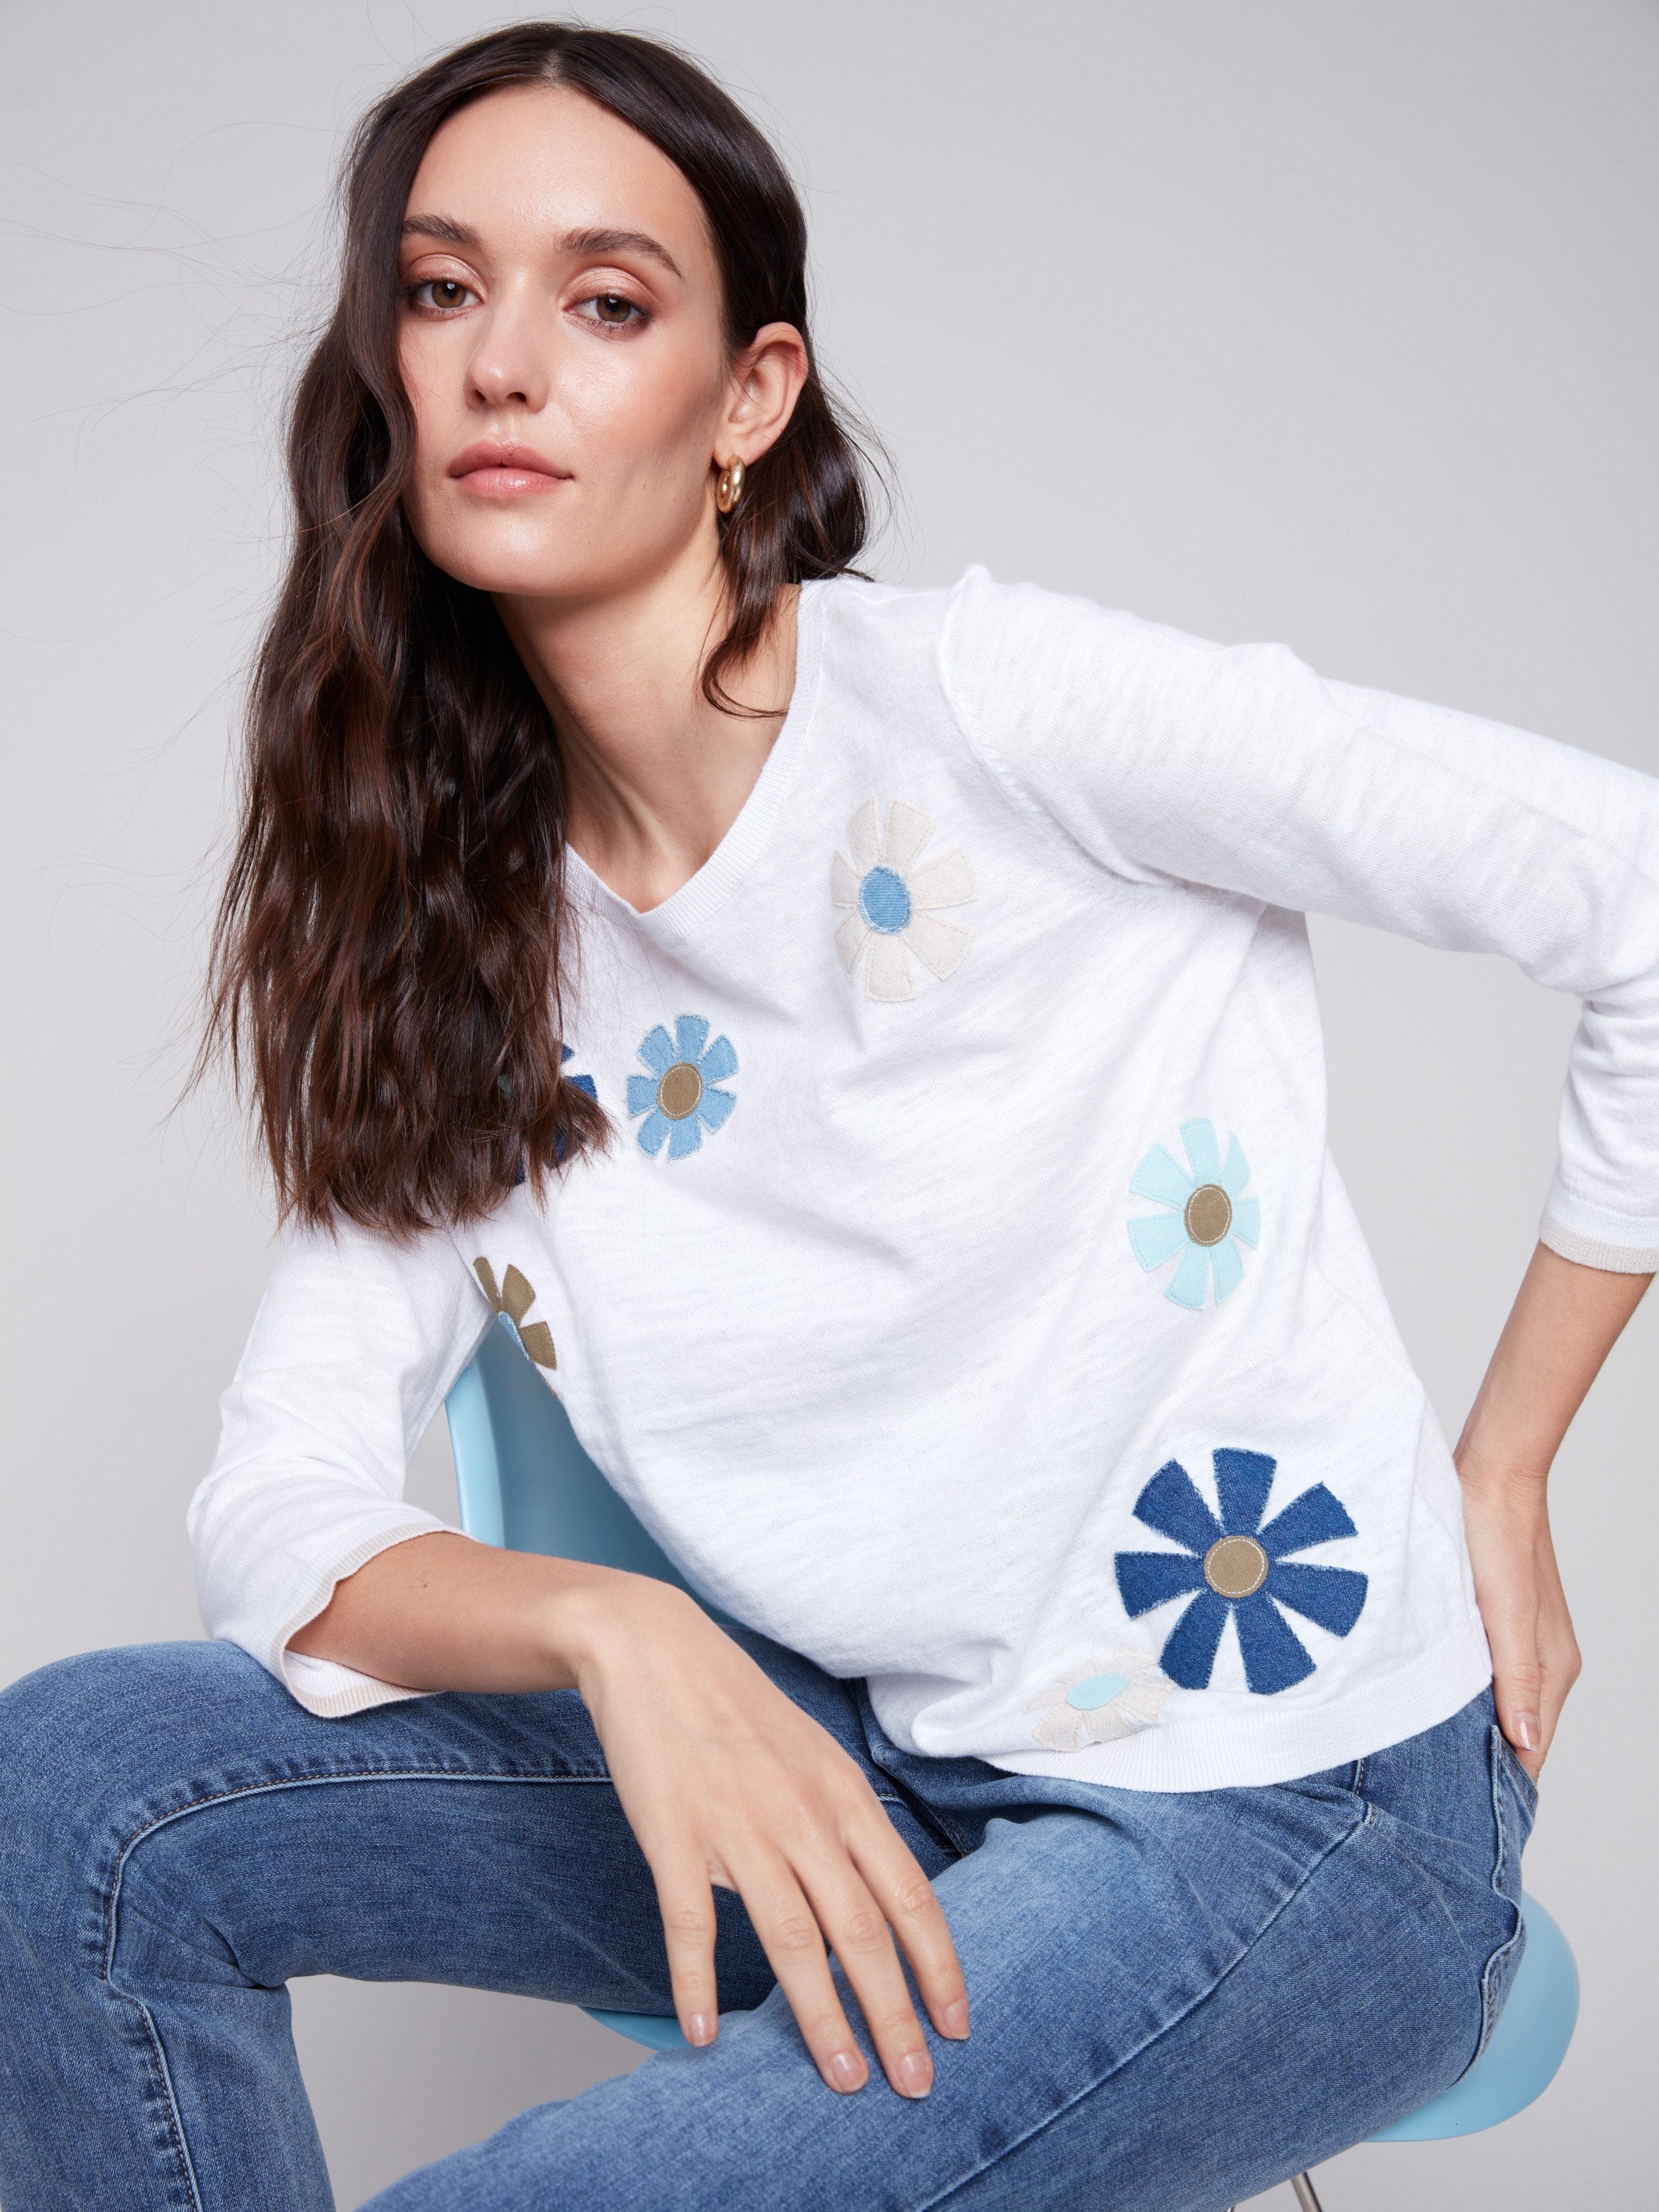 Sweater with Flower Patches - White - Charlie B Collection Canada - Image 2